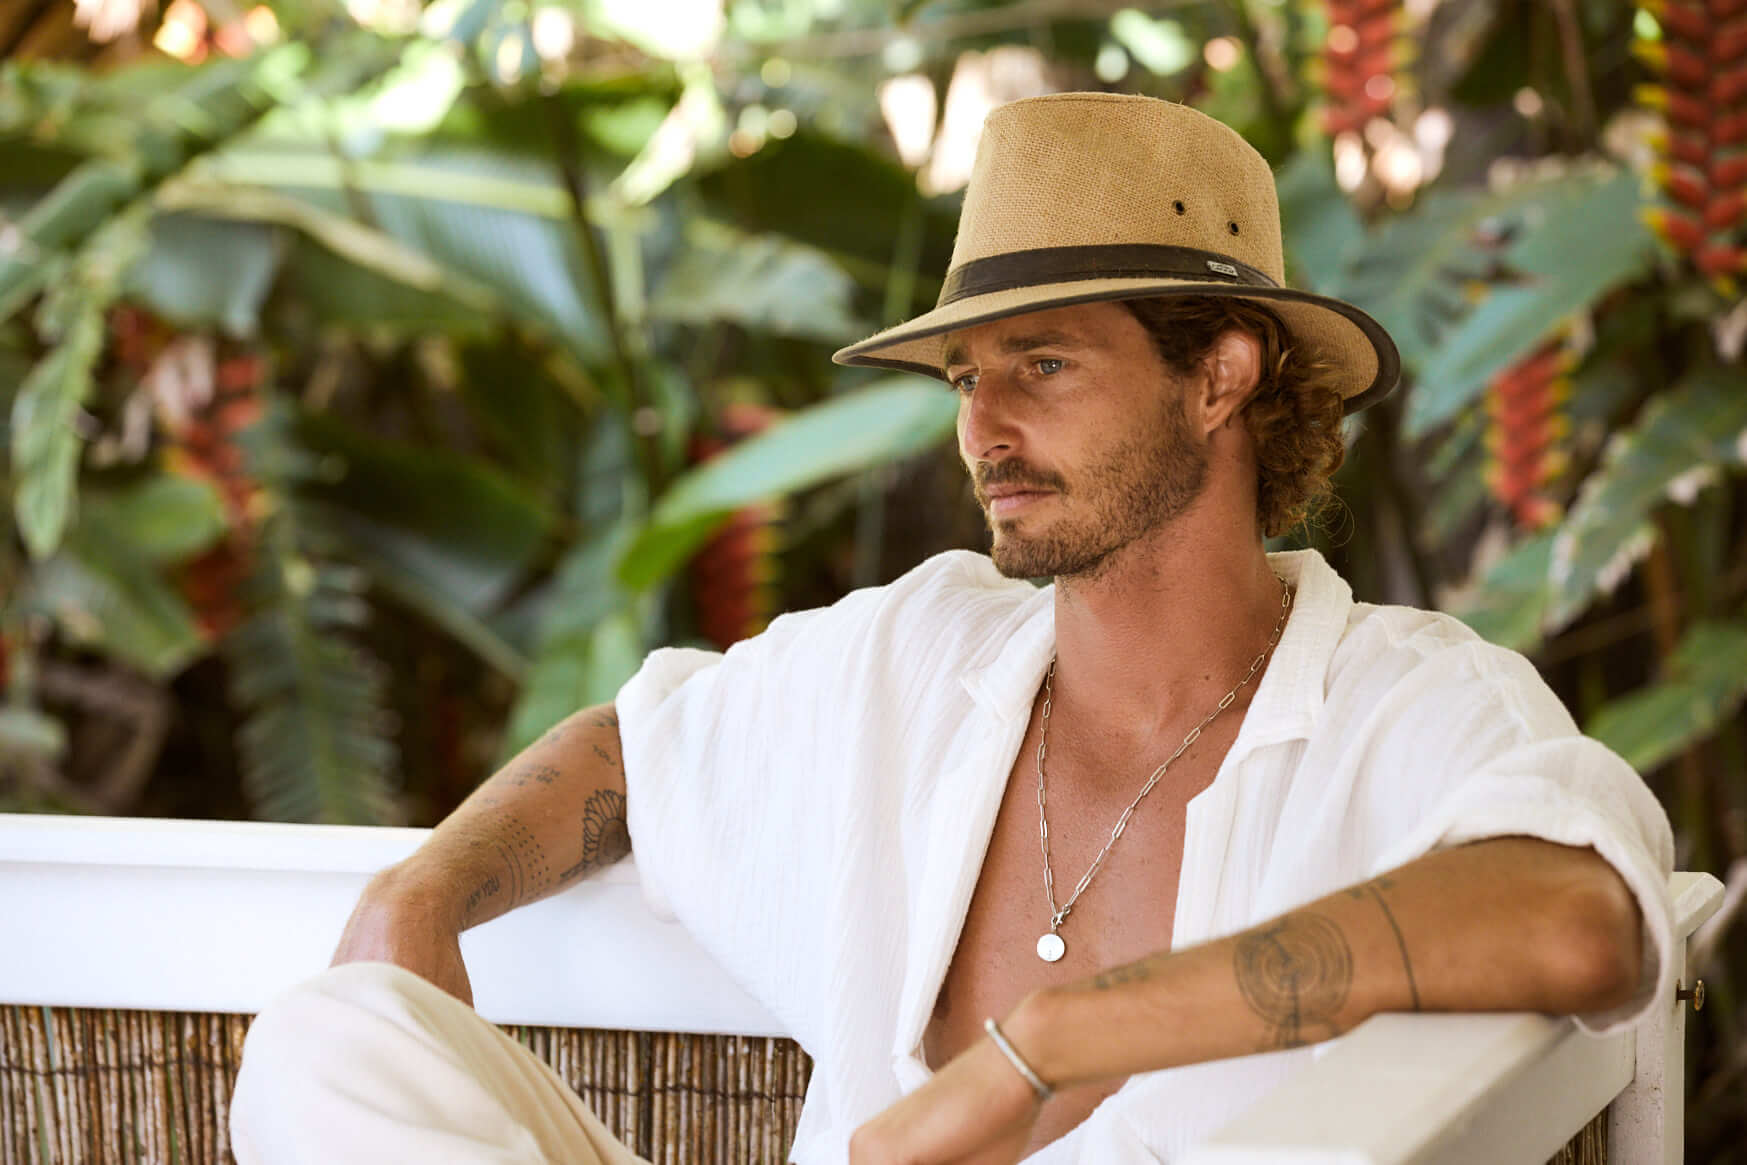 Man sitting in tropical location wearing safari style pinched front sun protection hat made from natural colored hemp with a dark brown band and trim